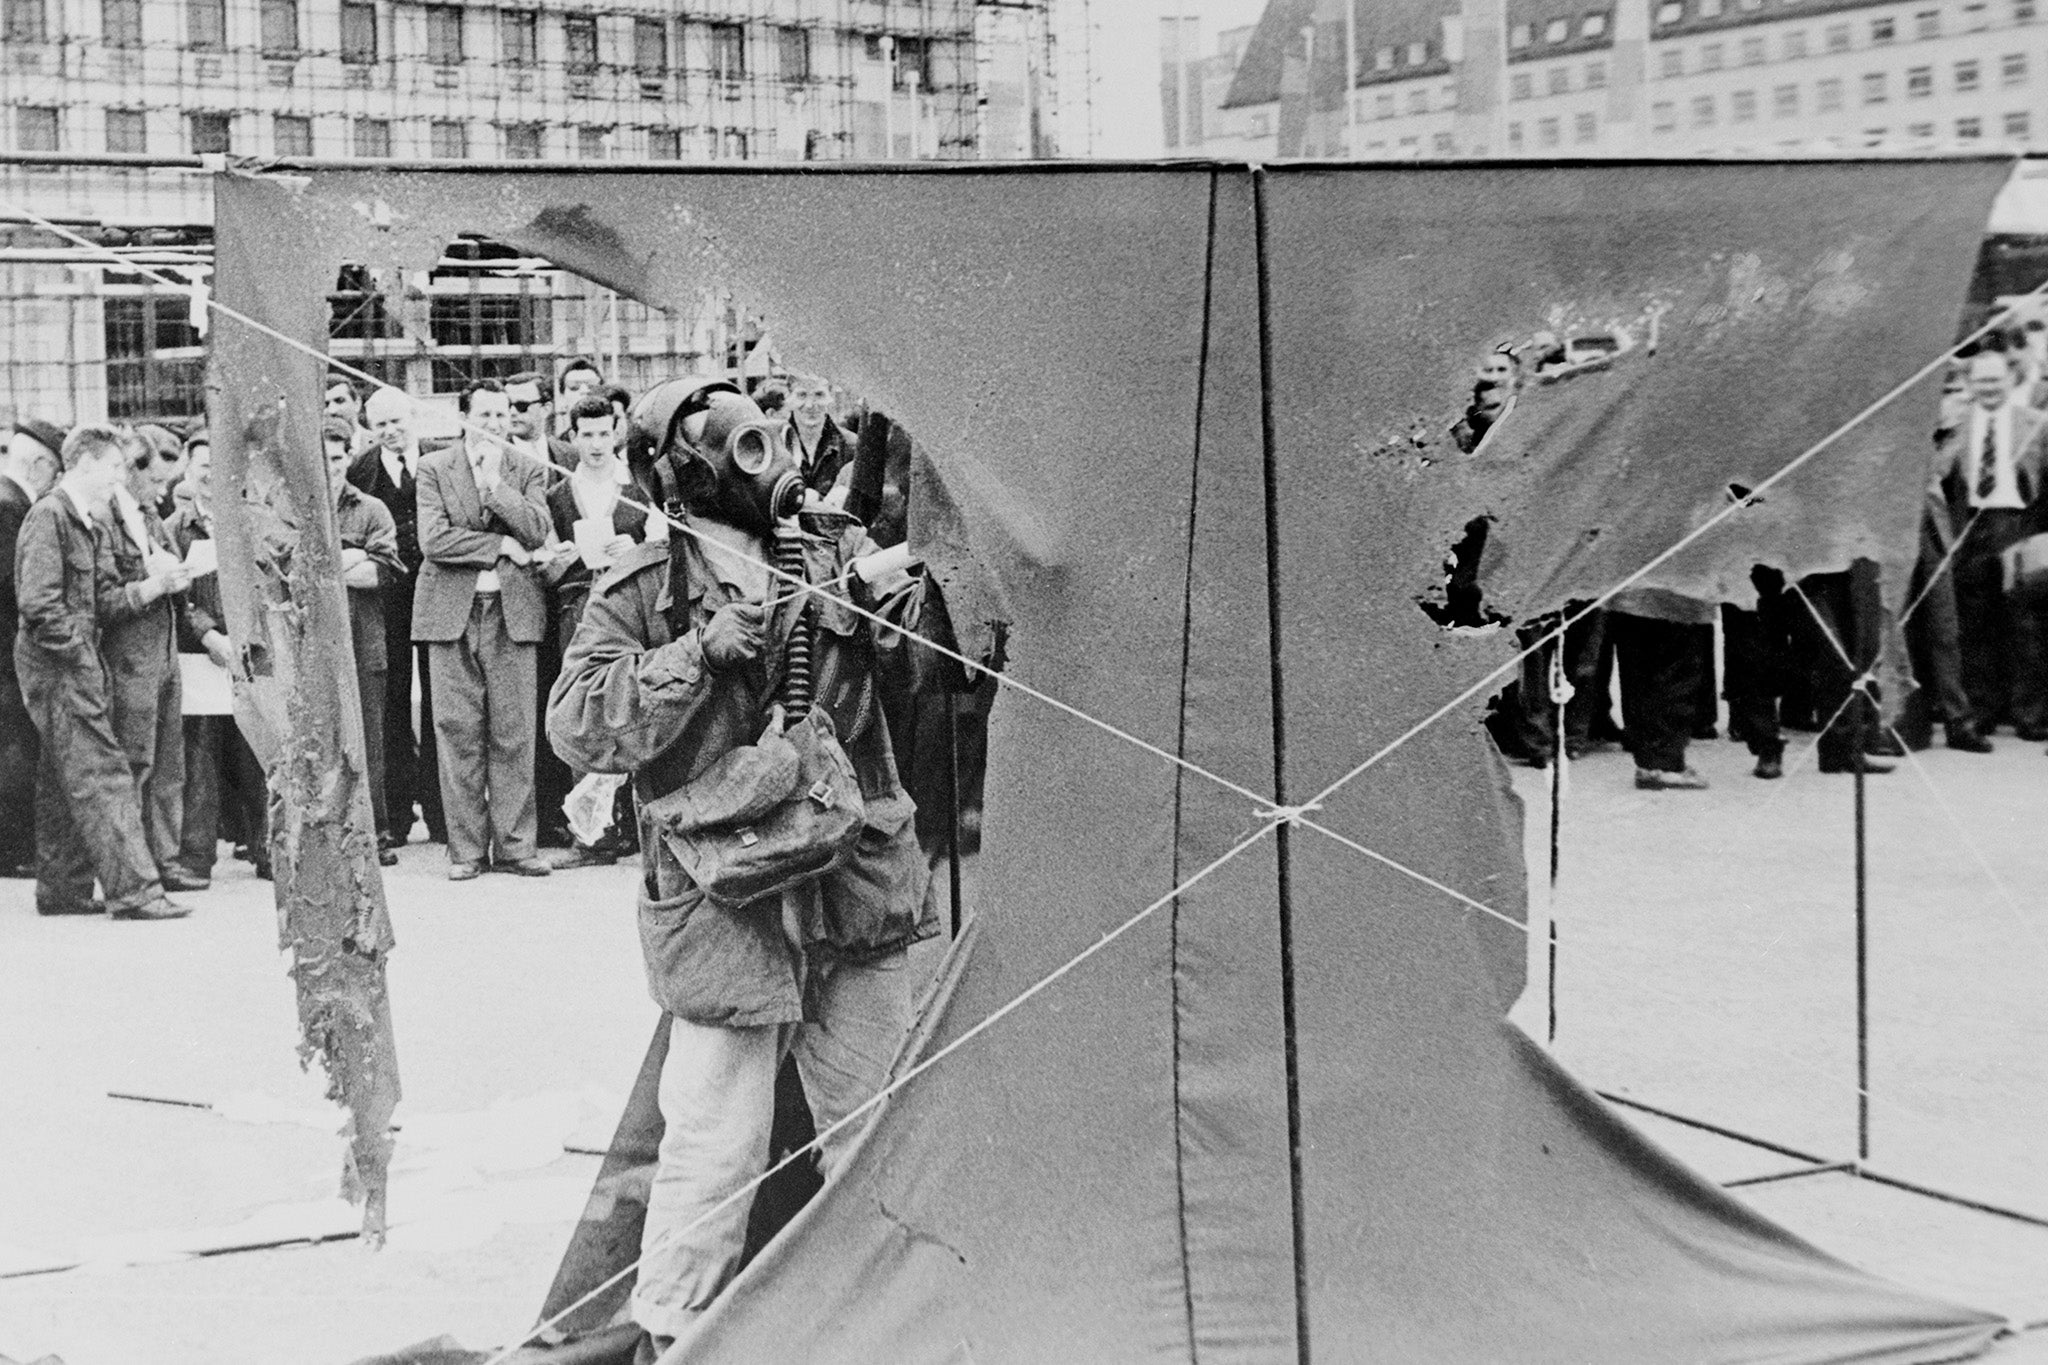 Metzger demonstrates his auto-destructive art at the South Bank, London, in 1961. He sprays hydrochloric acid on three nylon sheets, which begin to disintegrate after a few seconds, and are completely dissolved after 20 minutes